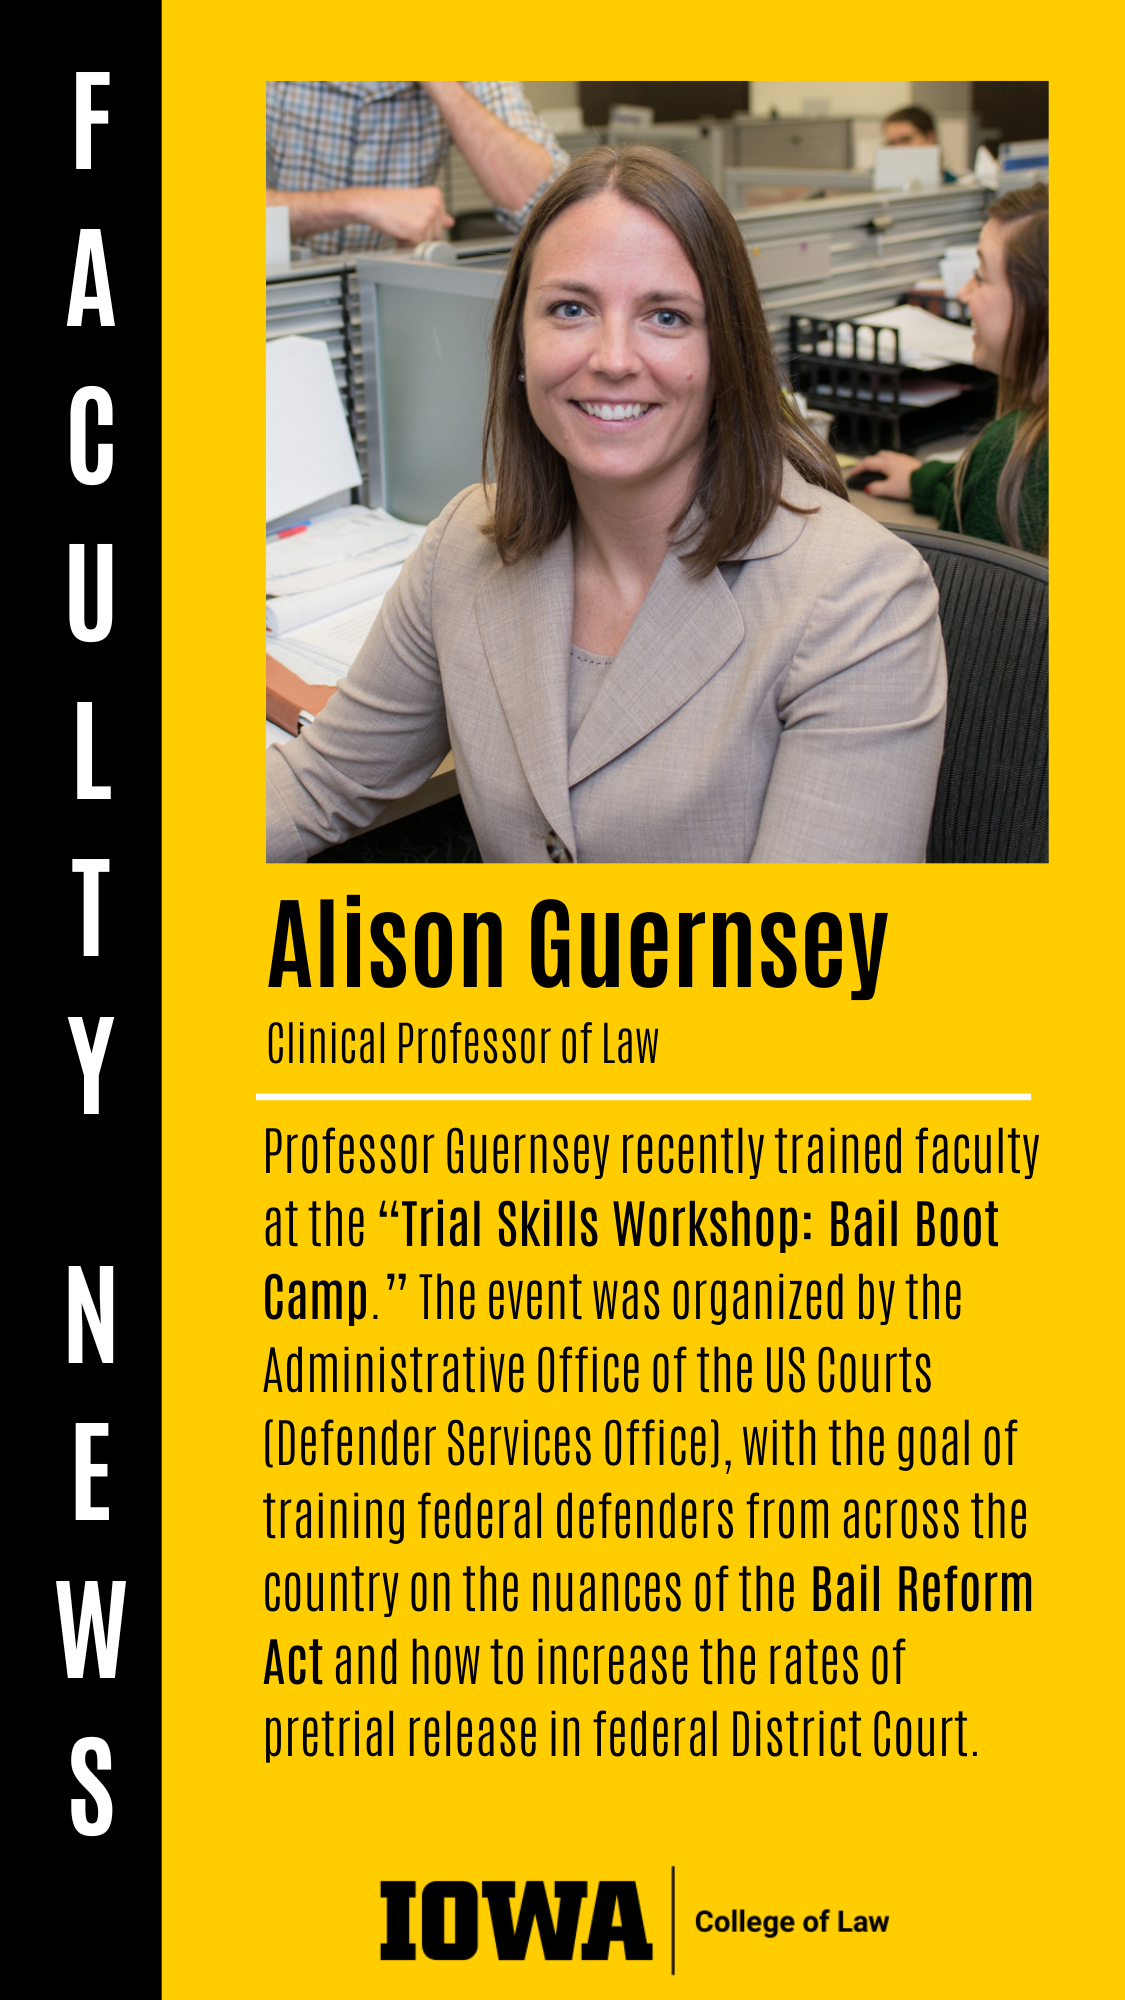 Alison Guernsey F A C U L T Y  N E W S Clinical Professor of Law Professor Guernsey recently trained faculty at the “Trial Skills Workshop: Bail Boot Camp.” The event was organized by the Administrative Office of the US Courts (Defender Services Office), with the goal of training federal defenders from across the country on the nuances of the Bail Reform Act and how to increase the rates of pretrial release in federal District Court.